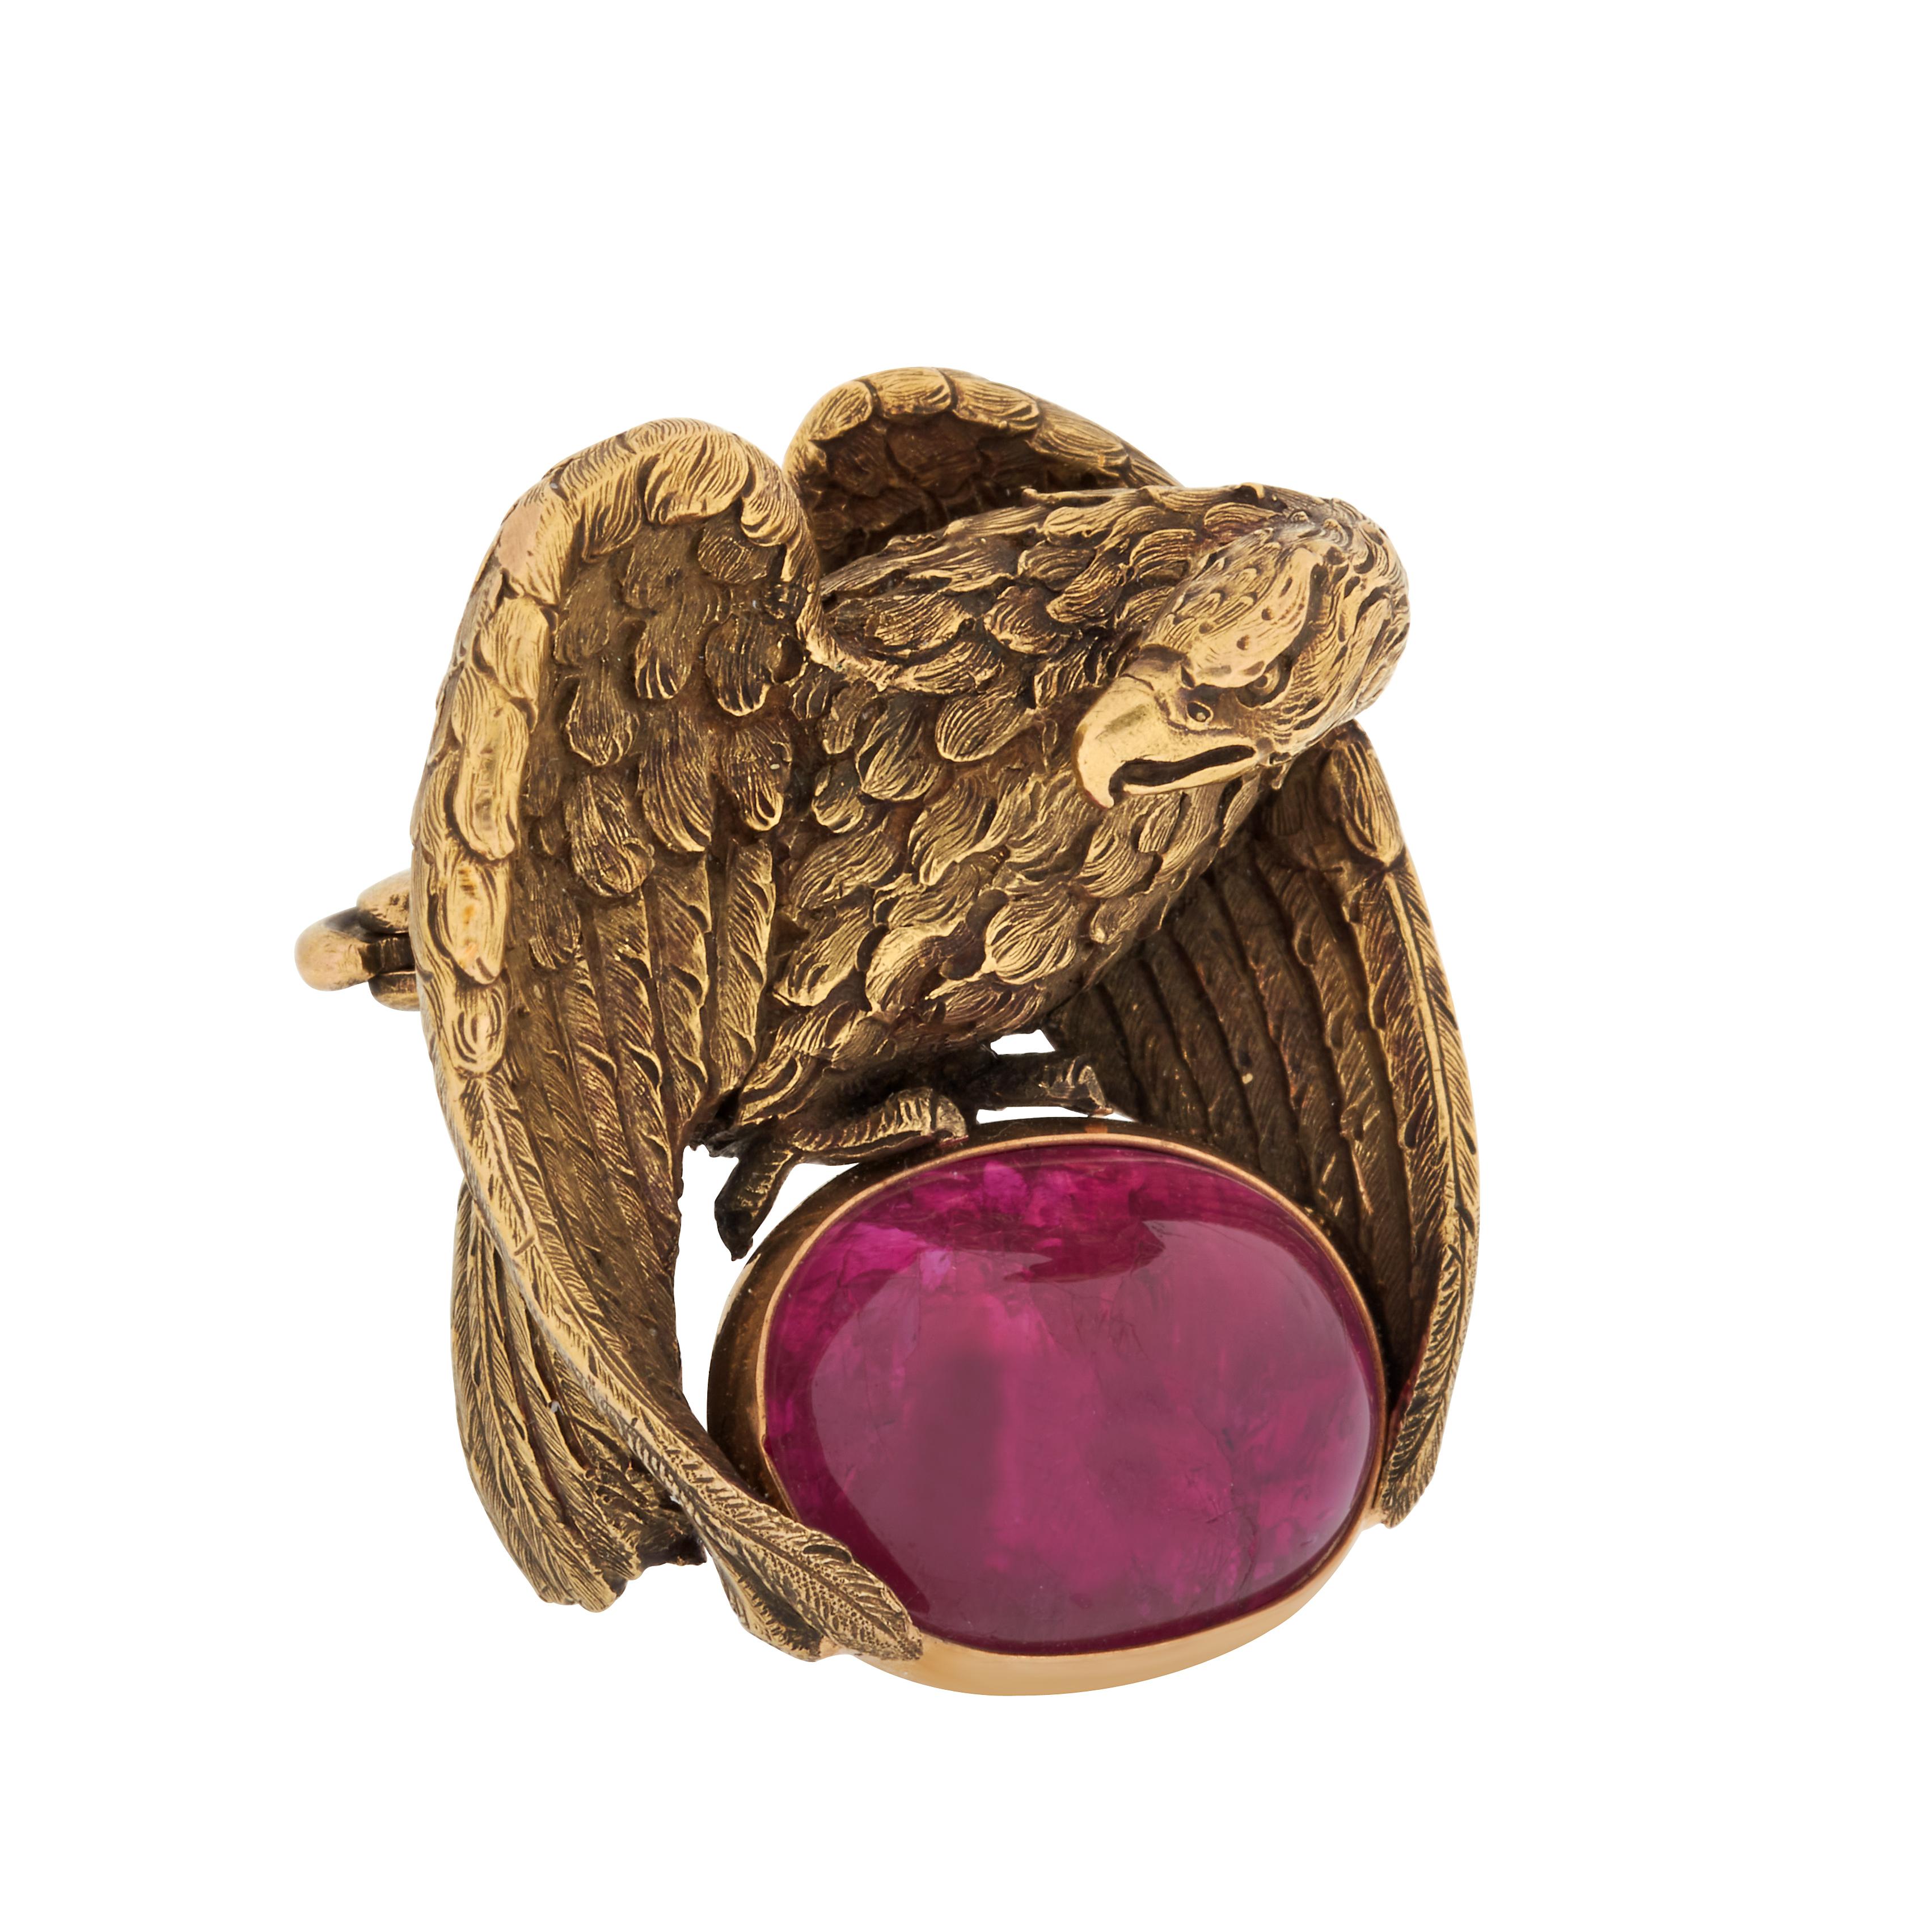 Vintage J.E. Caldwell & Co. cabochon ruby eagle brooch set in 18k yellow gold.  

This striking realistic eagle brooch features a bezel set 13.94 carat unheated oval cabochon ruby accompanied by an AGL brief report.  The ruby measures 14.73 x 10.87